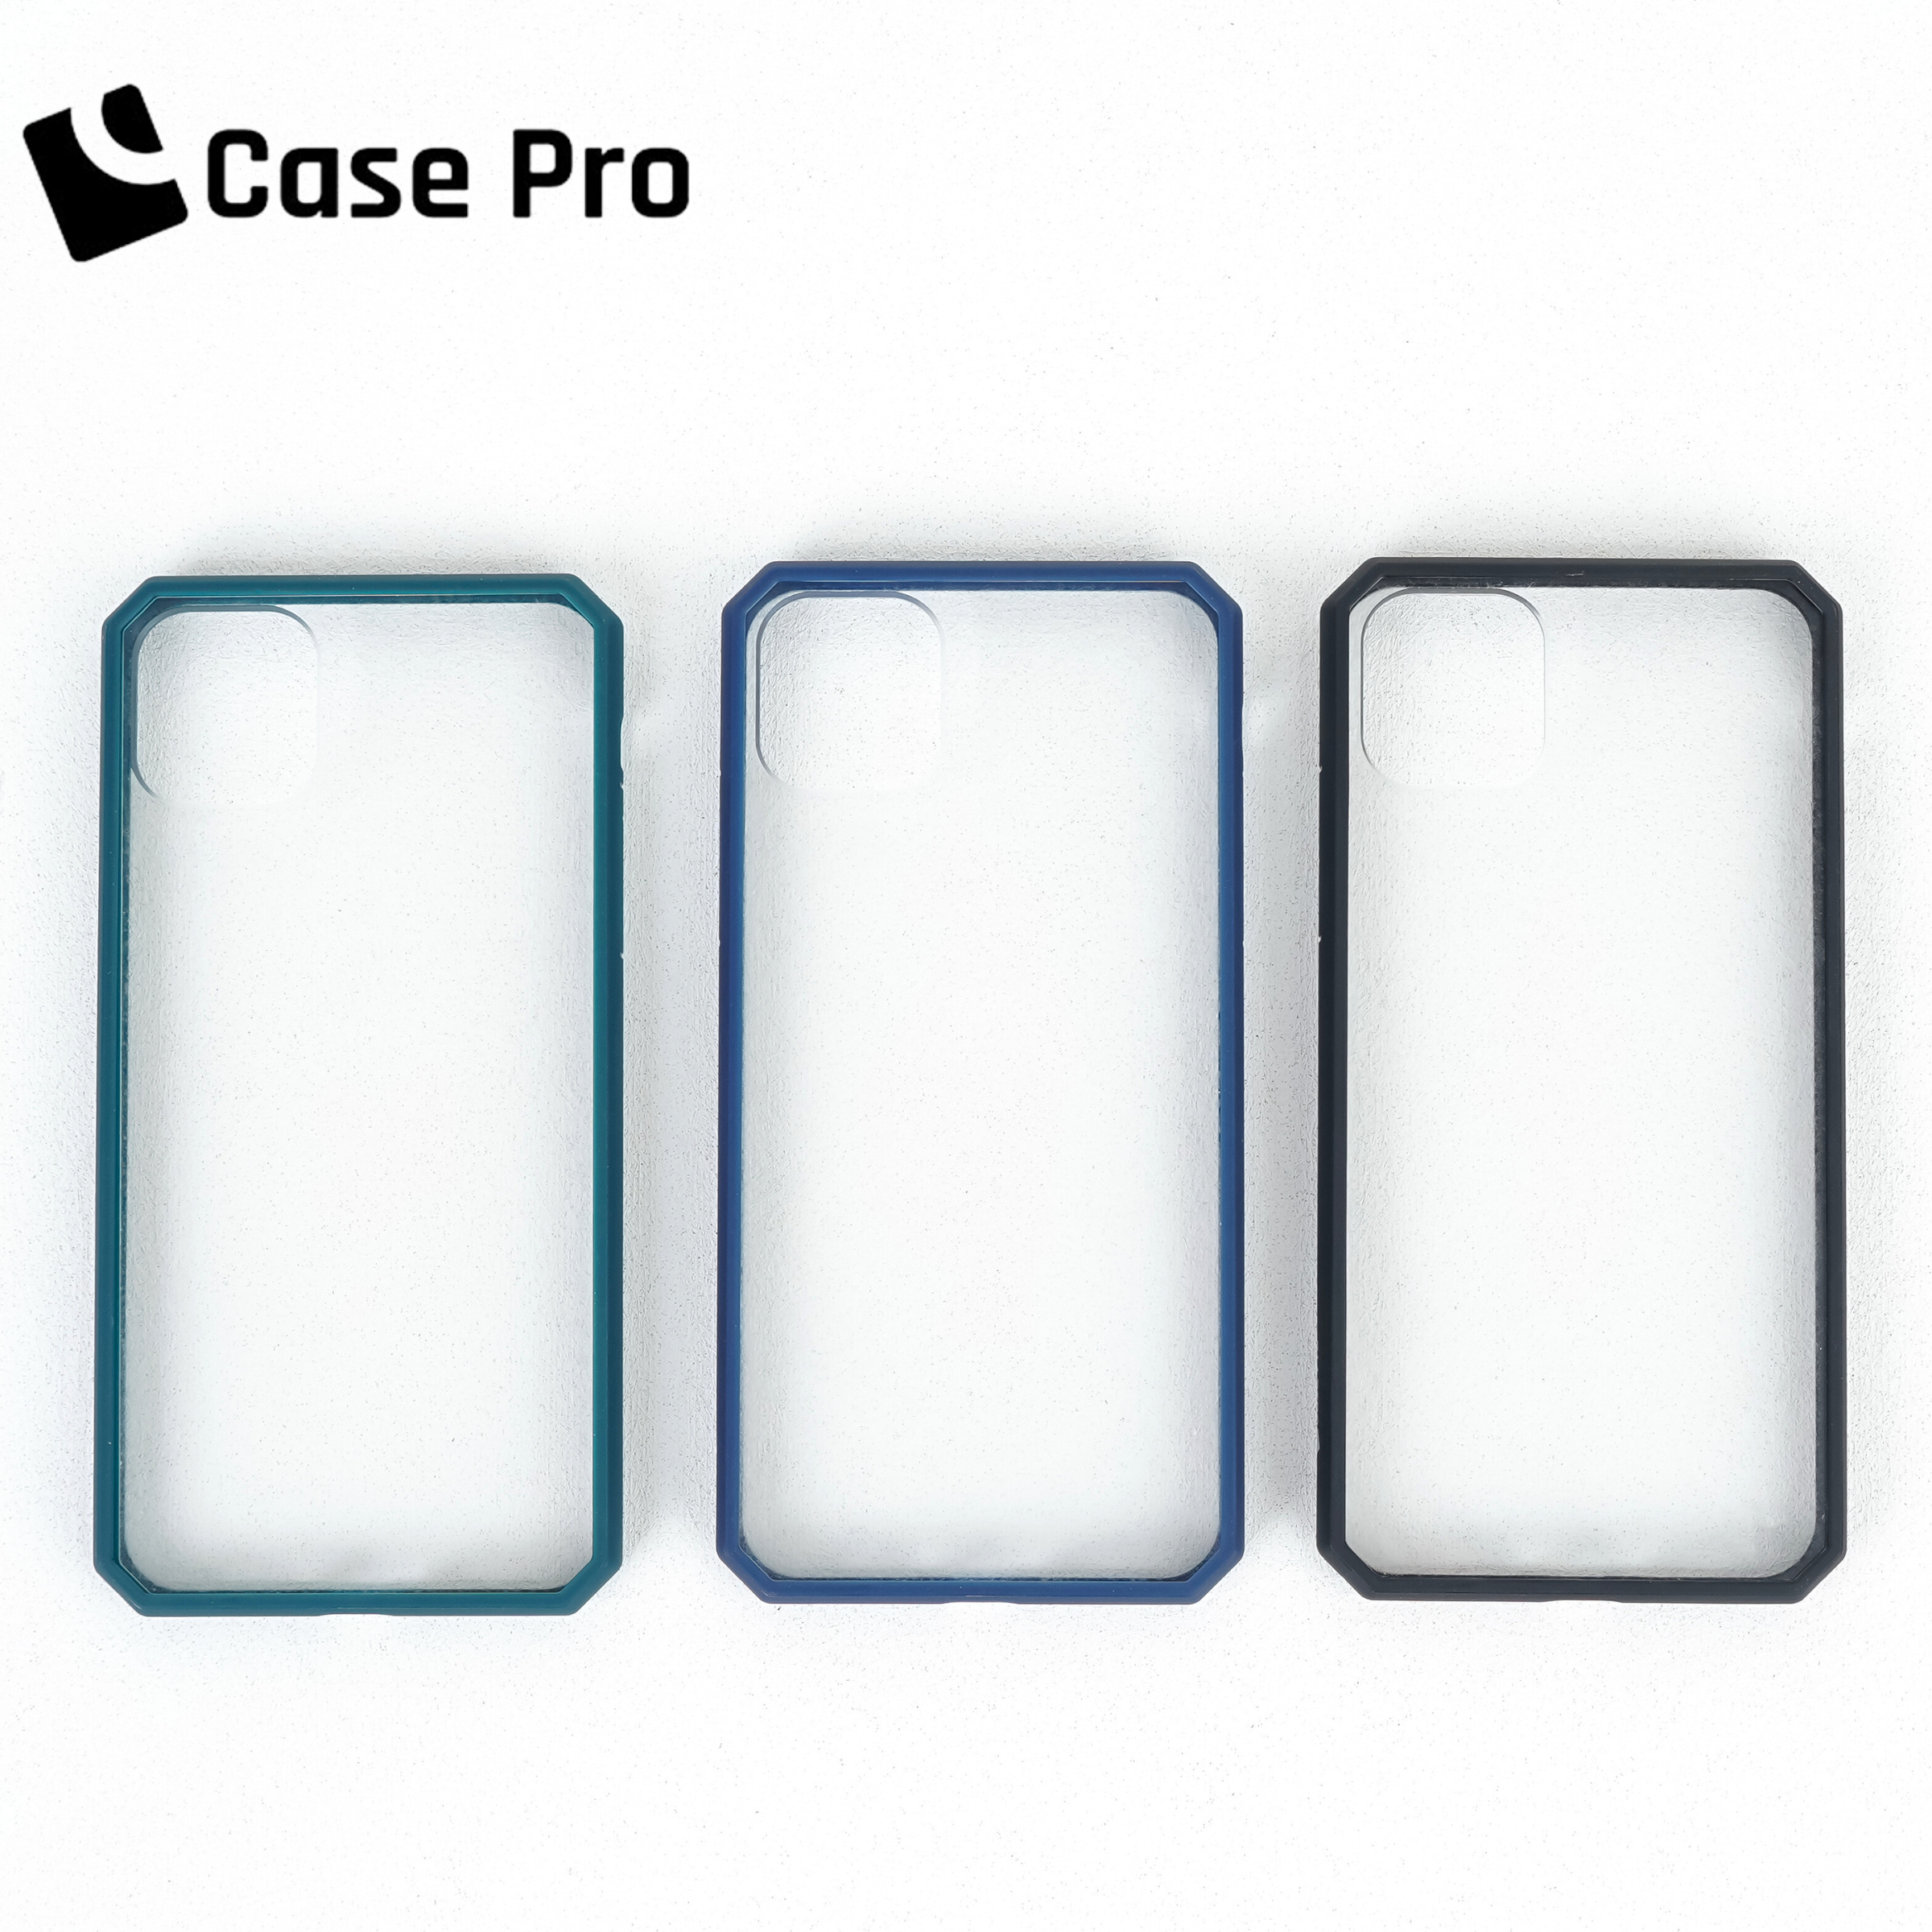 CASE PRO IMPACT PROTECTION CASE FOR IPH 12 PRO (6.1")